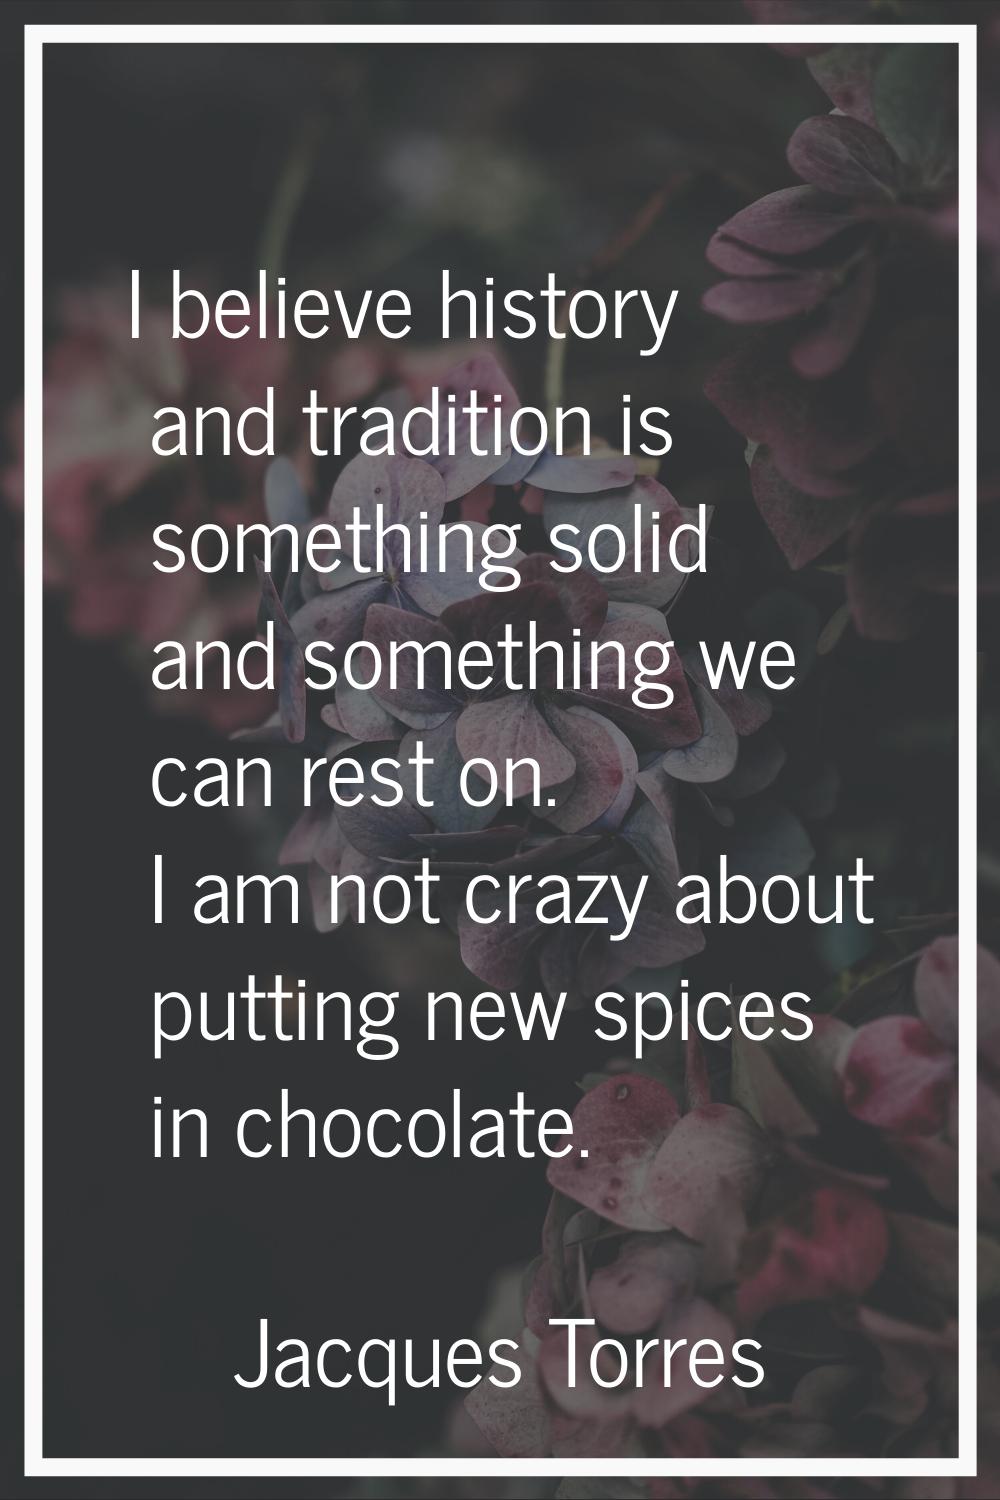 I believe history and tradition is something solid and something we can rest on. I am not crazy abo